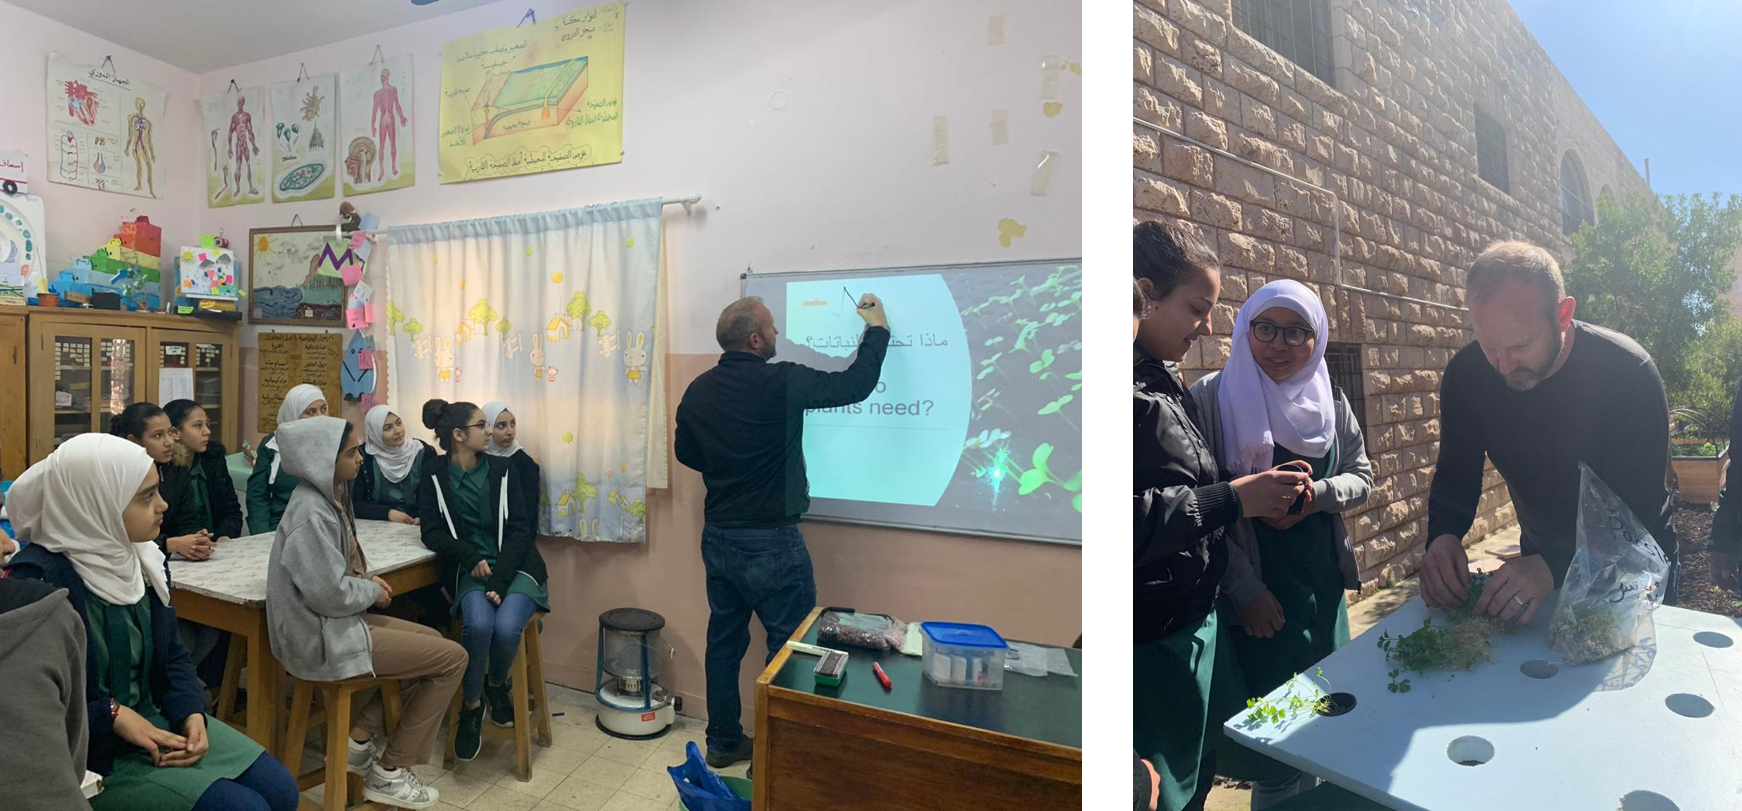 Images of a training session in hydroponic planting carried out in the school by Kevin Schiltz, who is one of the planting consultants that CSBE has worked with on its urban agriculture project.